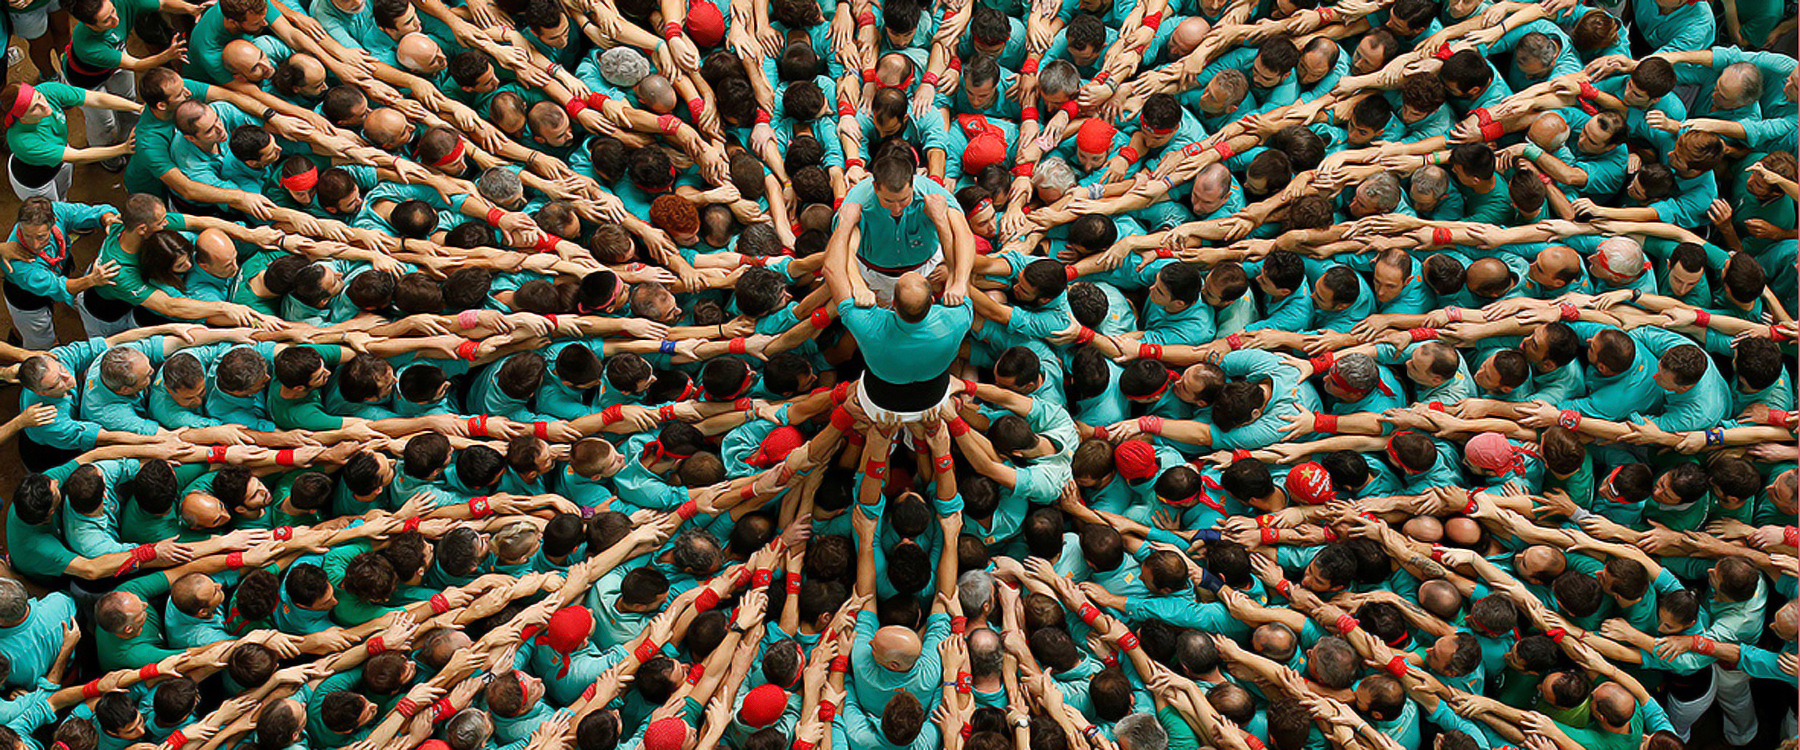 human towers pile up for the for the 26th concurs de castells in catalonia, spain